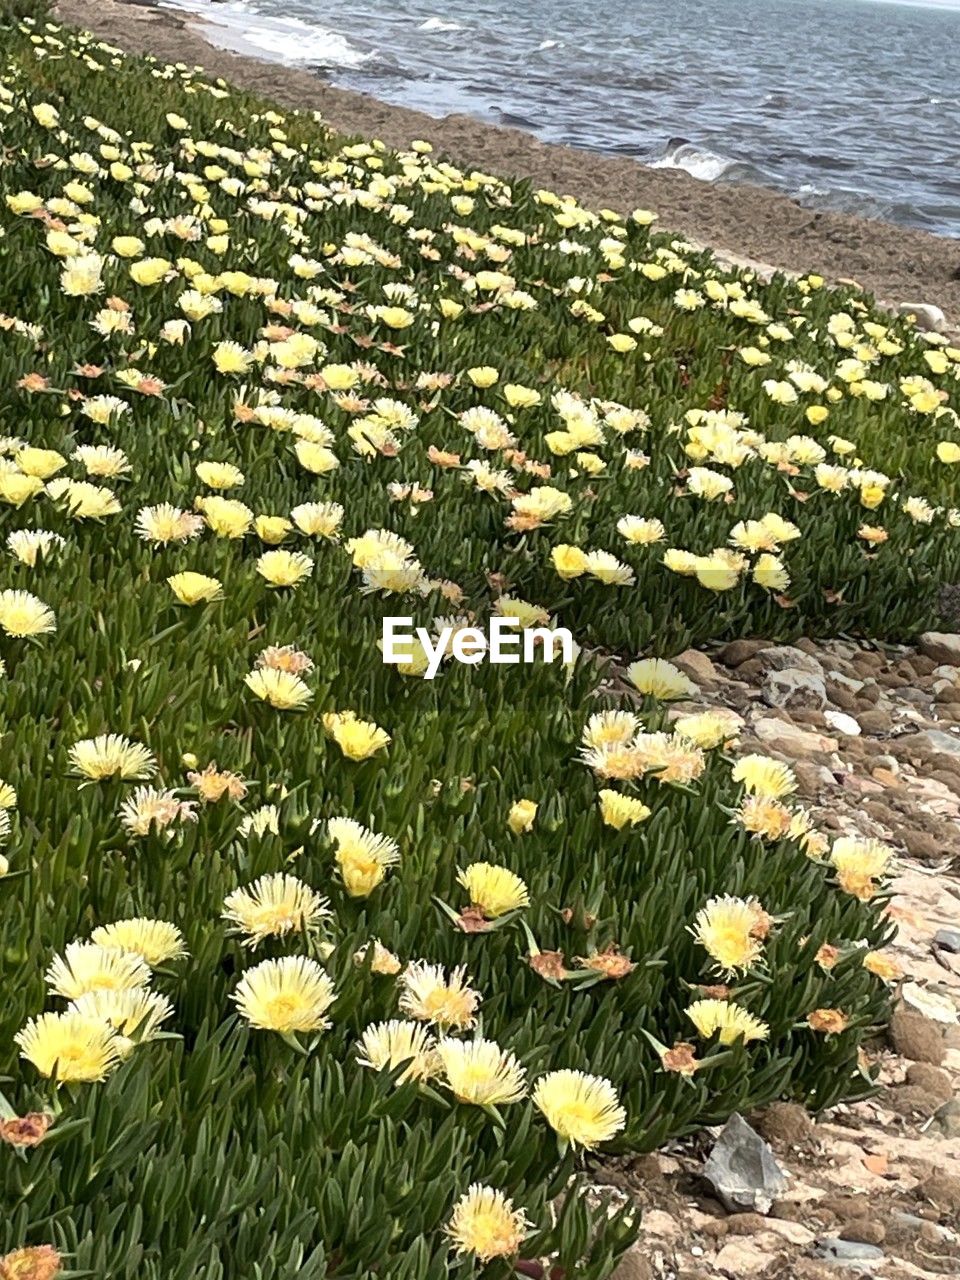 plant, beauty in nature, flower, flowering plant, land, nature, growth, freshness, water, day, sea, no people, fragility, tranquility, high angle view, beach, sunlight, green, yellow, scenics - nature, grass, outdoors, wildflower, tranquil scene, field, meadow, close-up